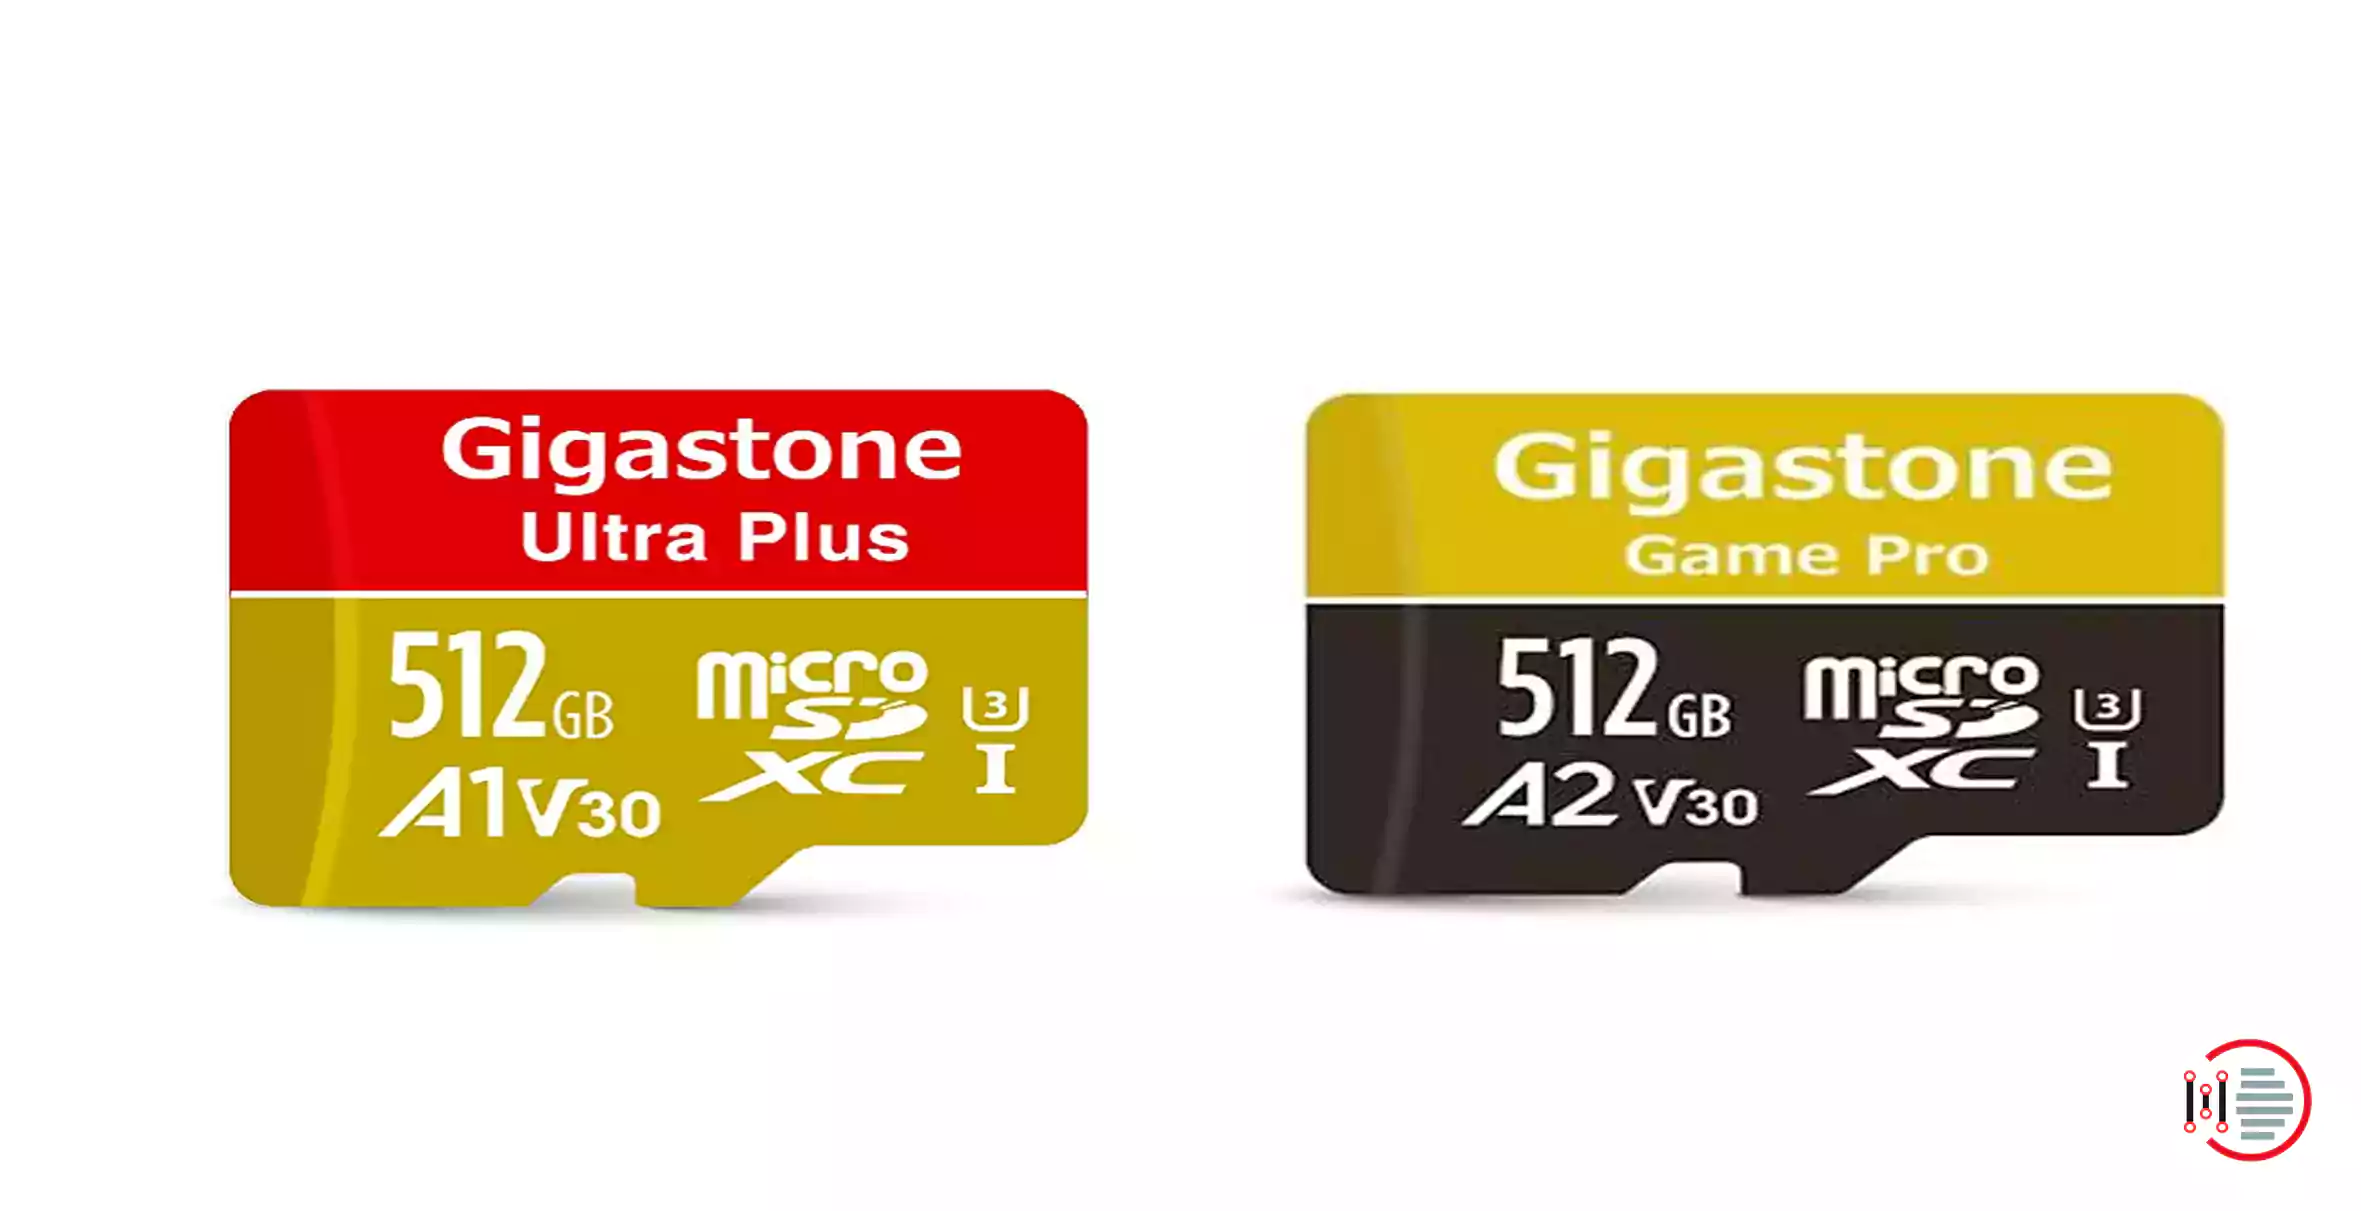 Which is the largest capacity micro SD- Gigastone 512gb